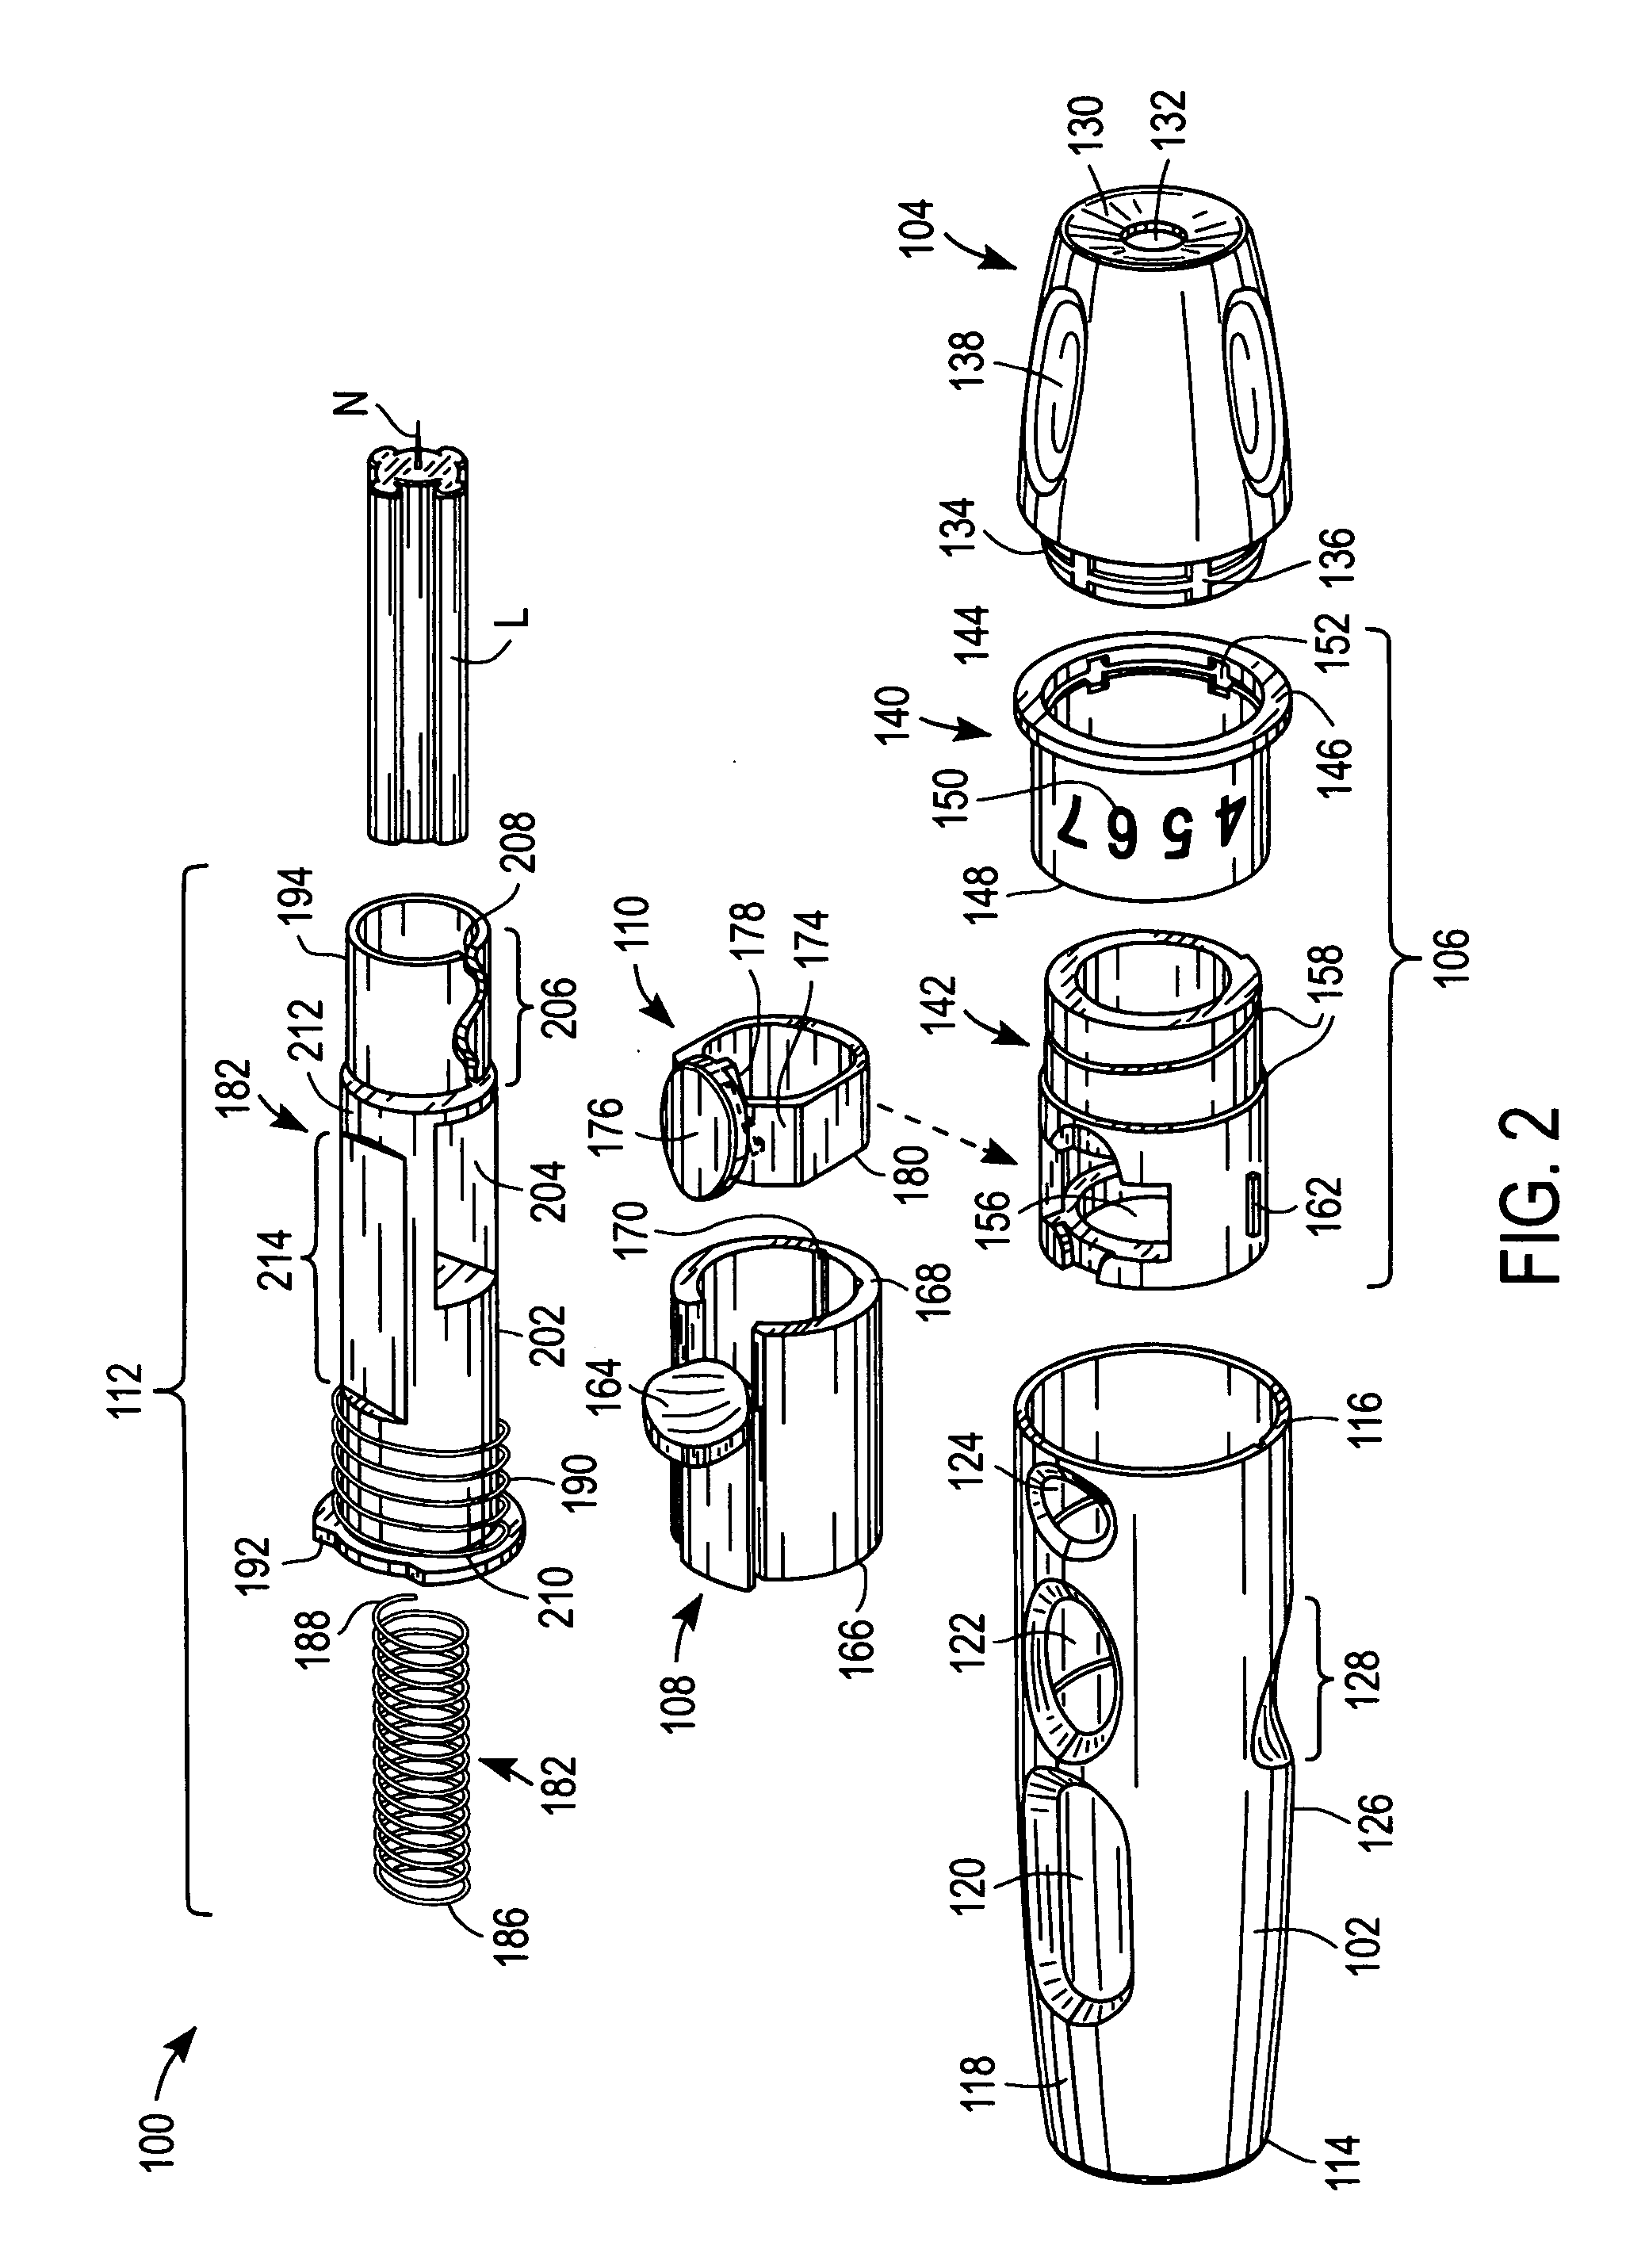 Compact lancing device